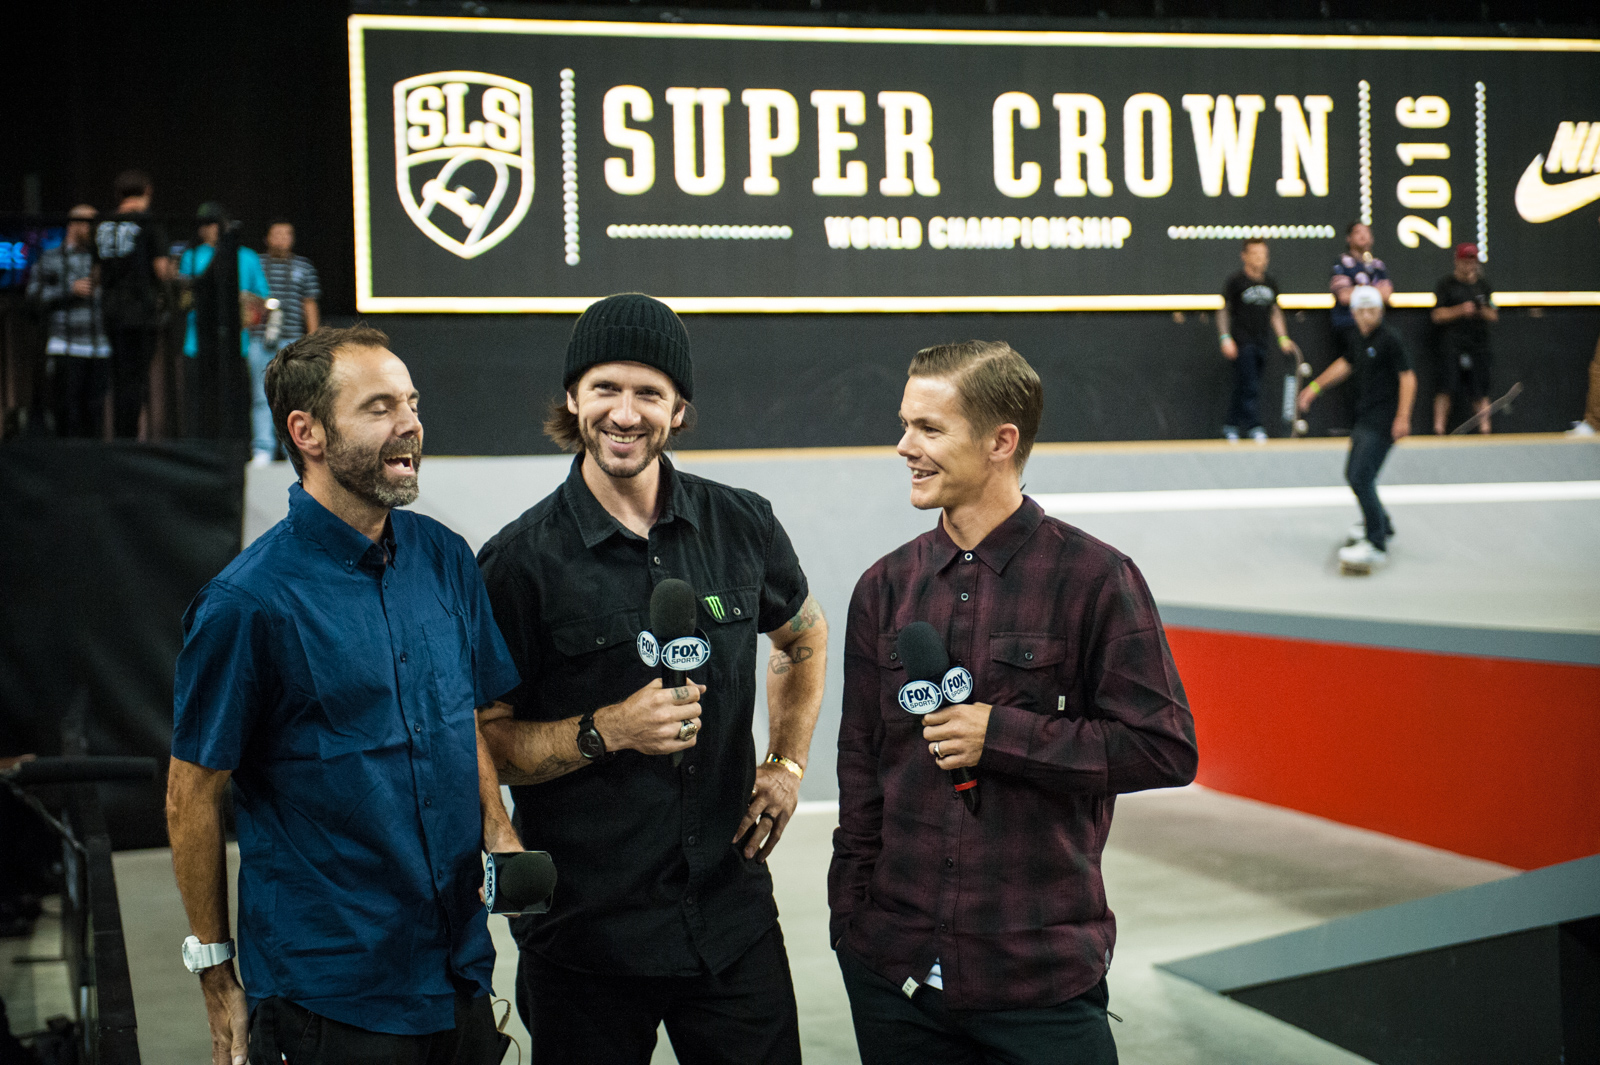 Monster Energy's Chris Cole Commentating at the SLS Nike SB Super Crown World Championship in Los Angeles